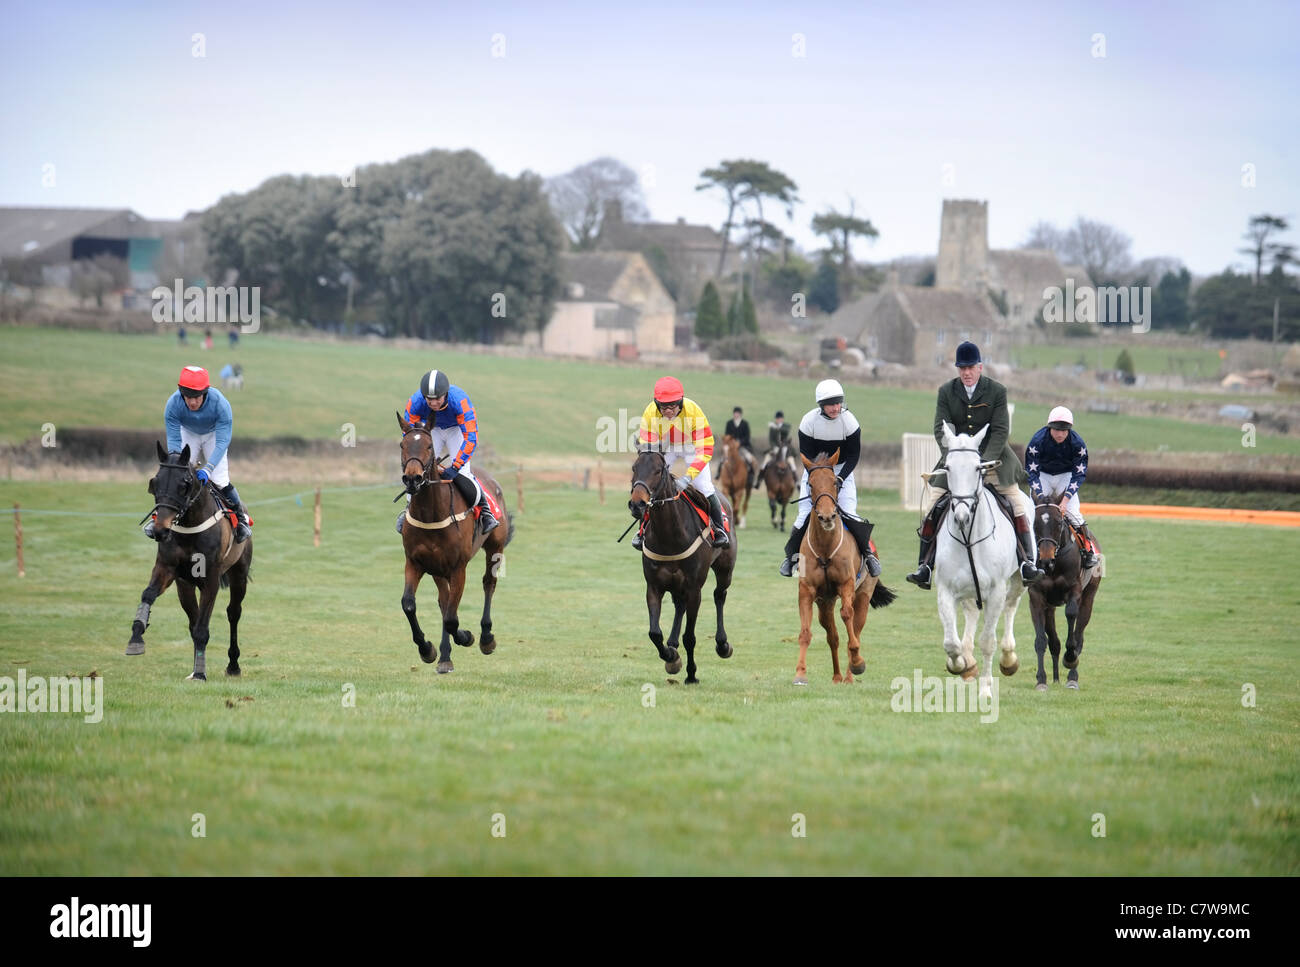 Sheknowsyouknow ridden by M. Wall (left, red diamond on silks) is escorted back after winning the Hunt members opening race at t Stock Photo